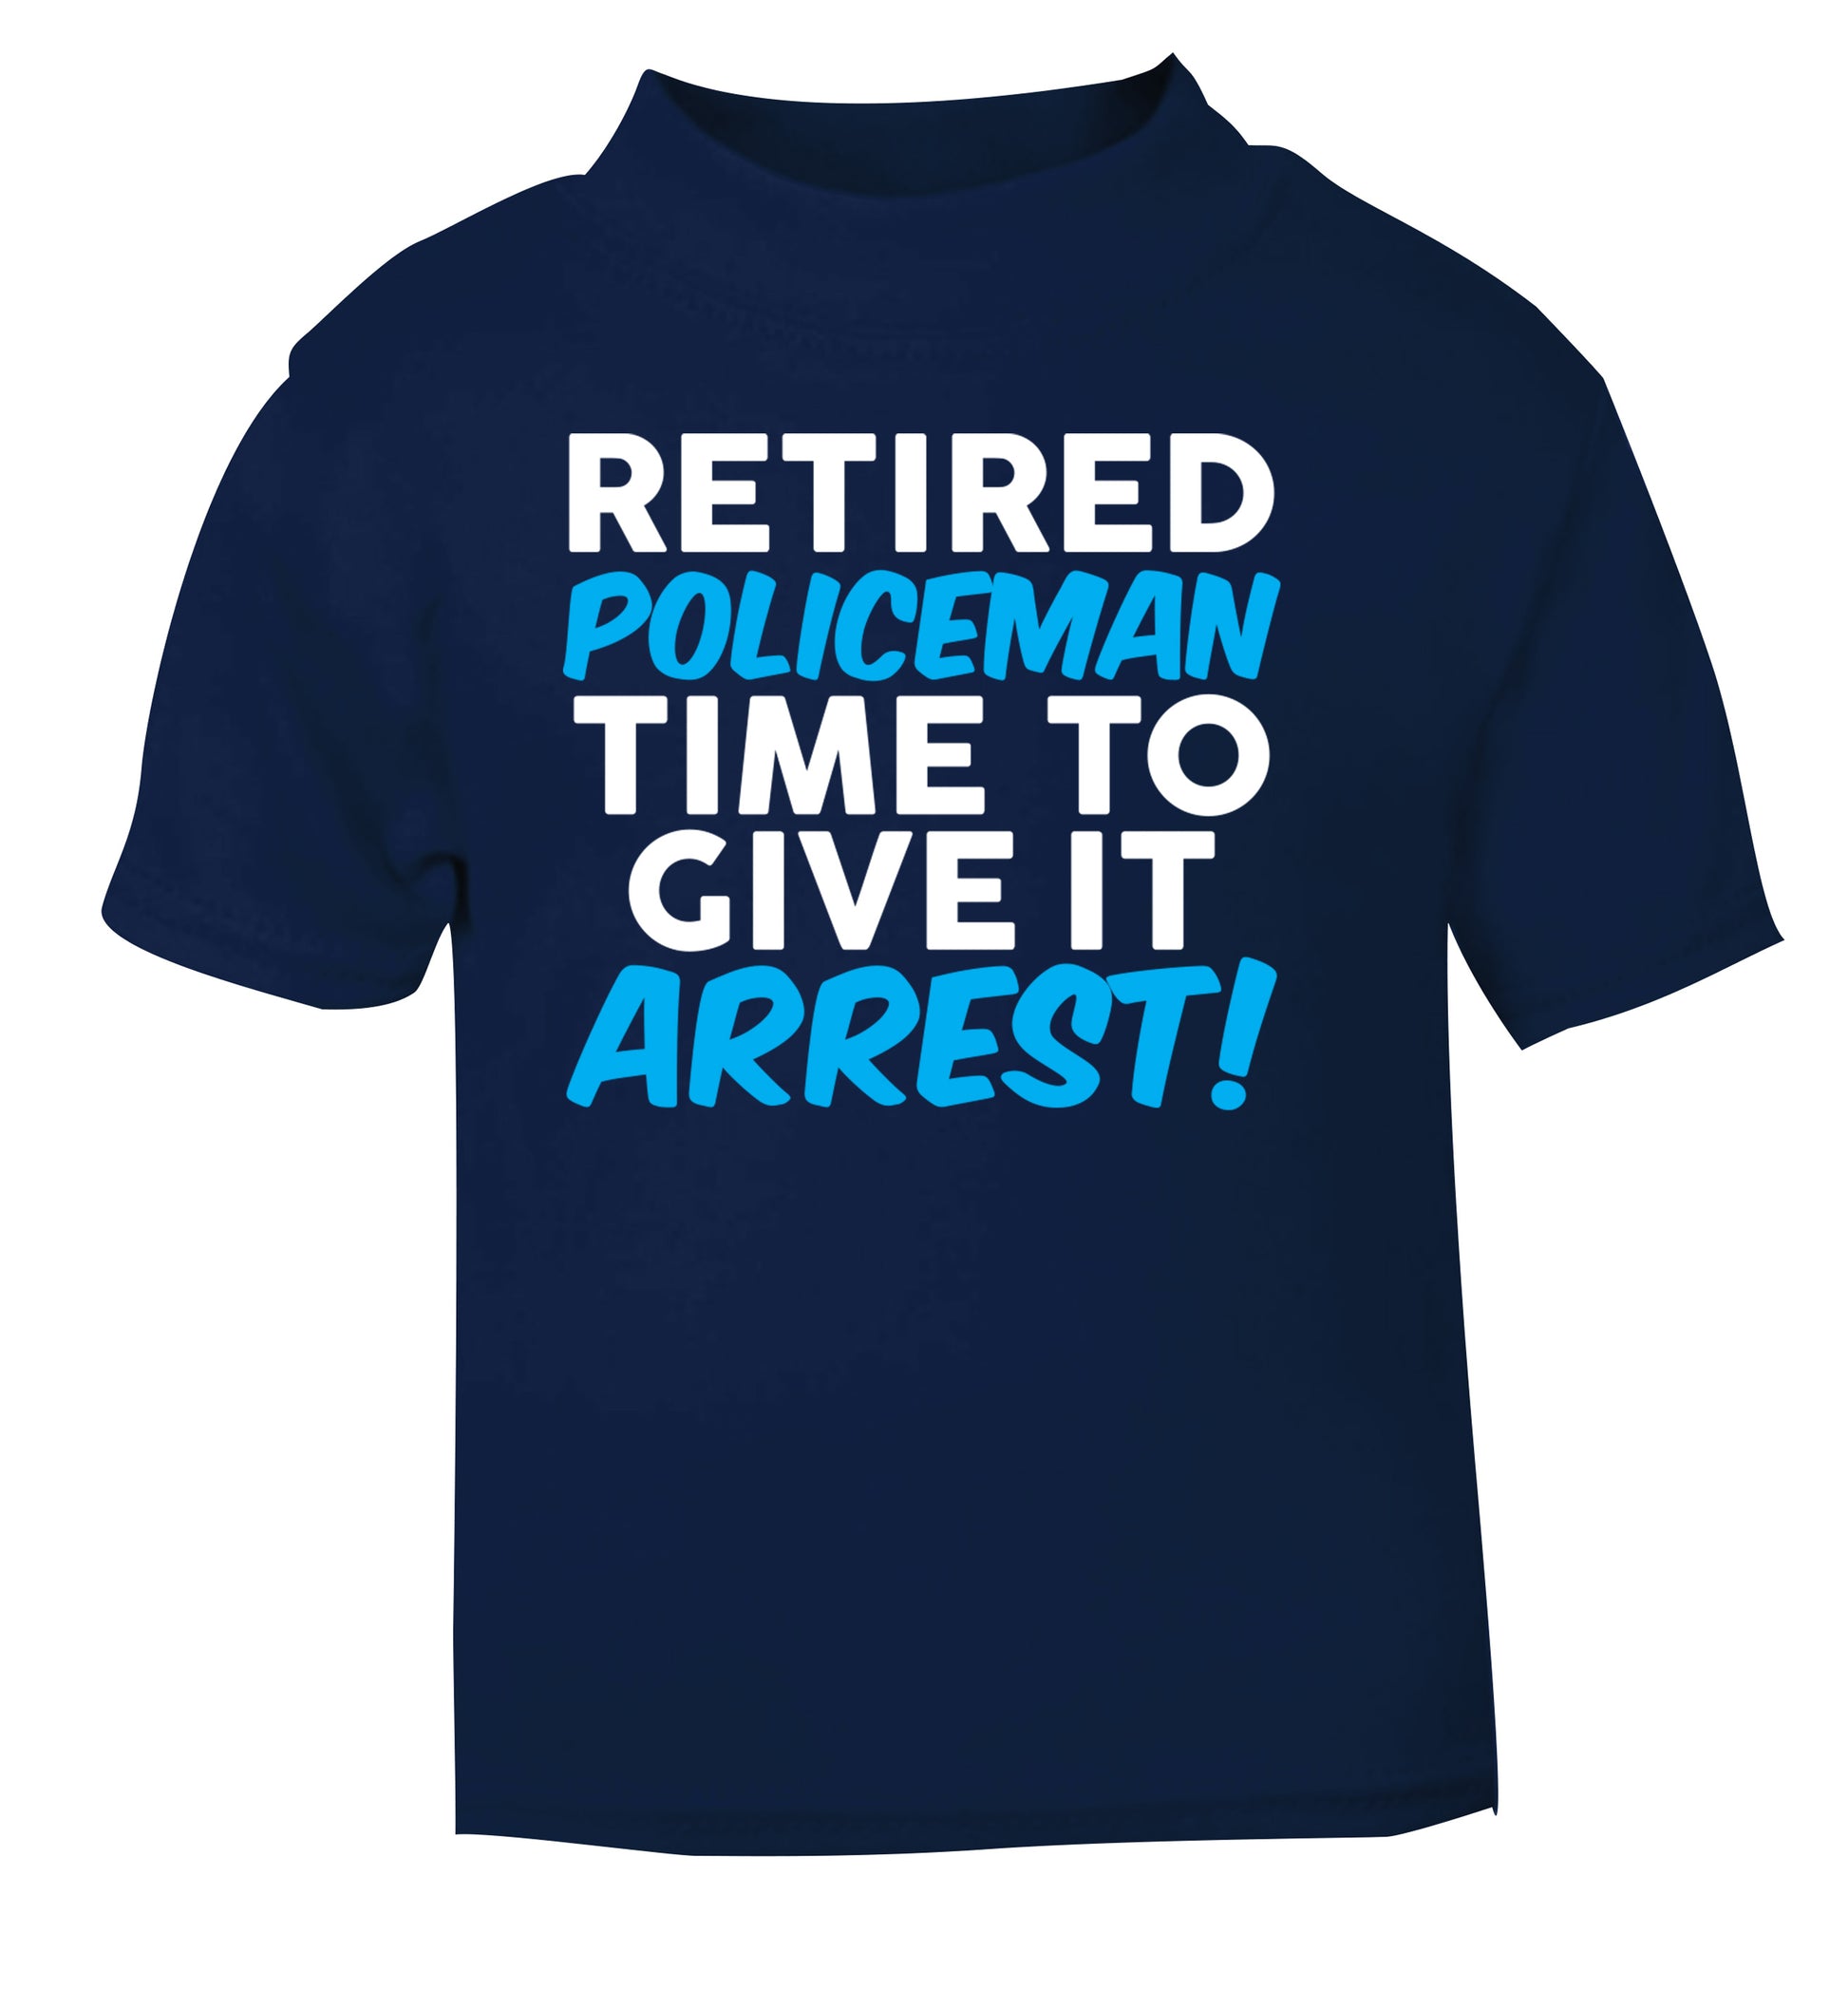 Retired policeman give it arresst! navy Baby Toddler Tshirt 2 Years